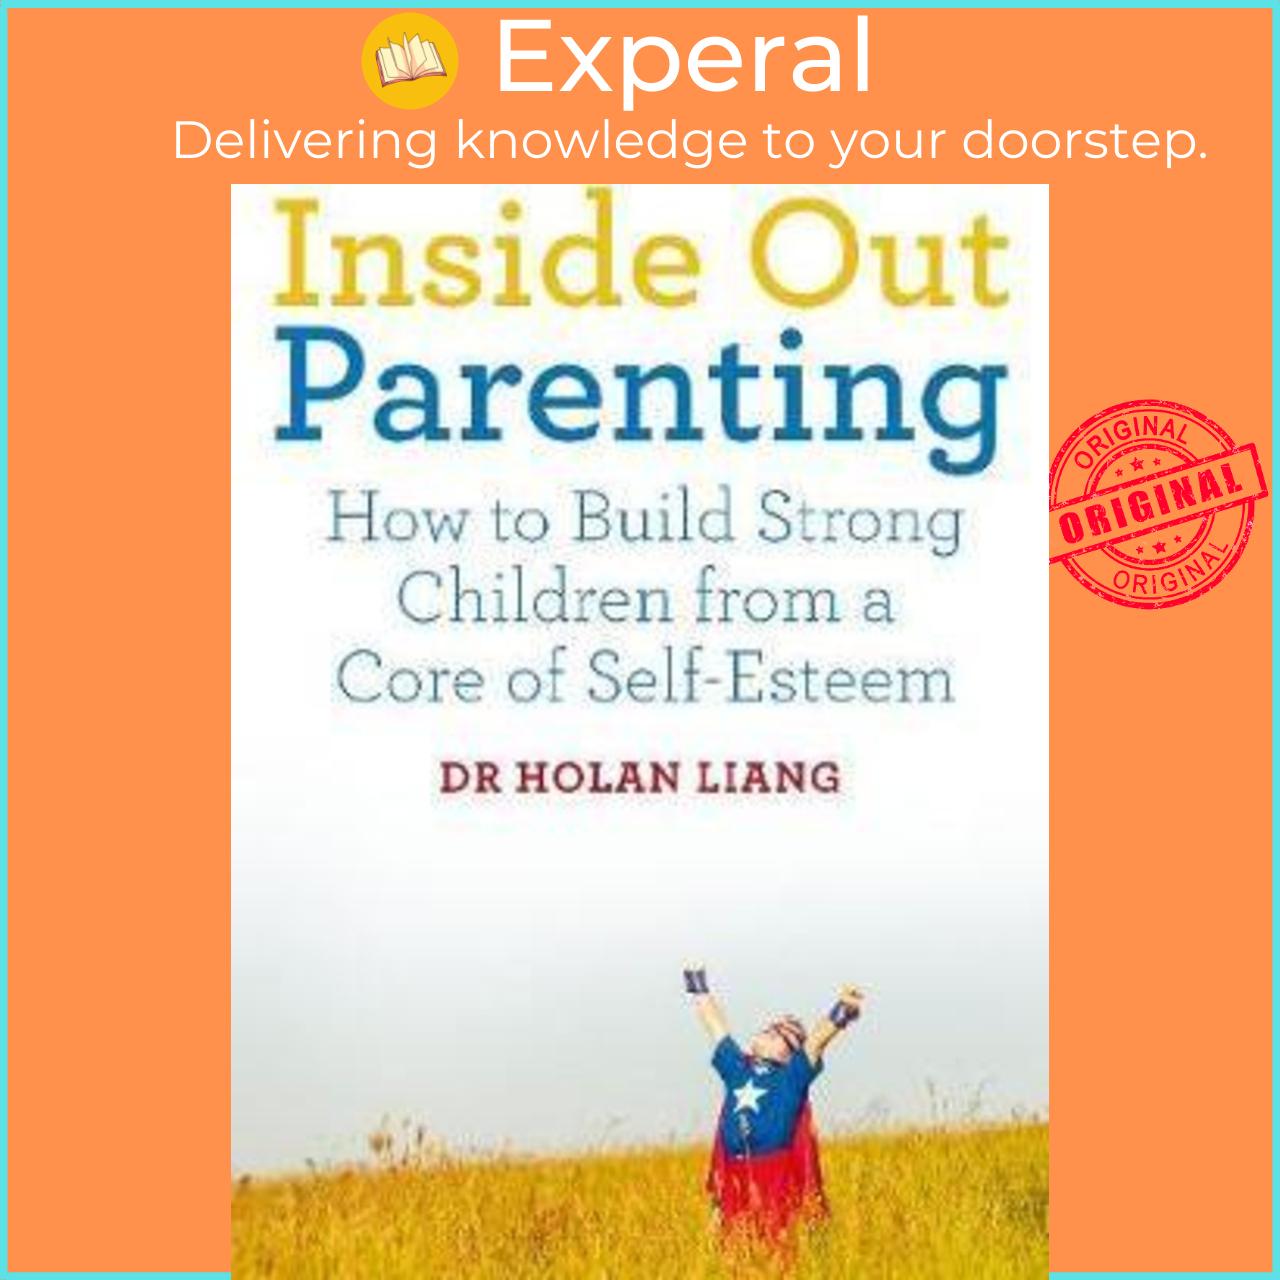 Hình ảnh Sách - Inside Out Parenting : How to Build Strong Children from a Core of Self by Dr Holan Liang (UK edition, paperback)